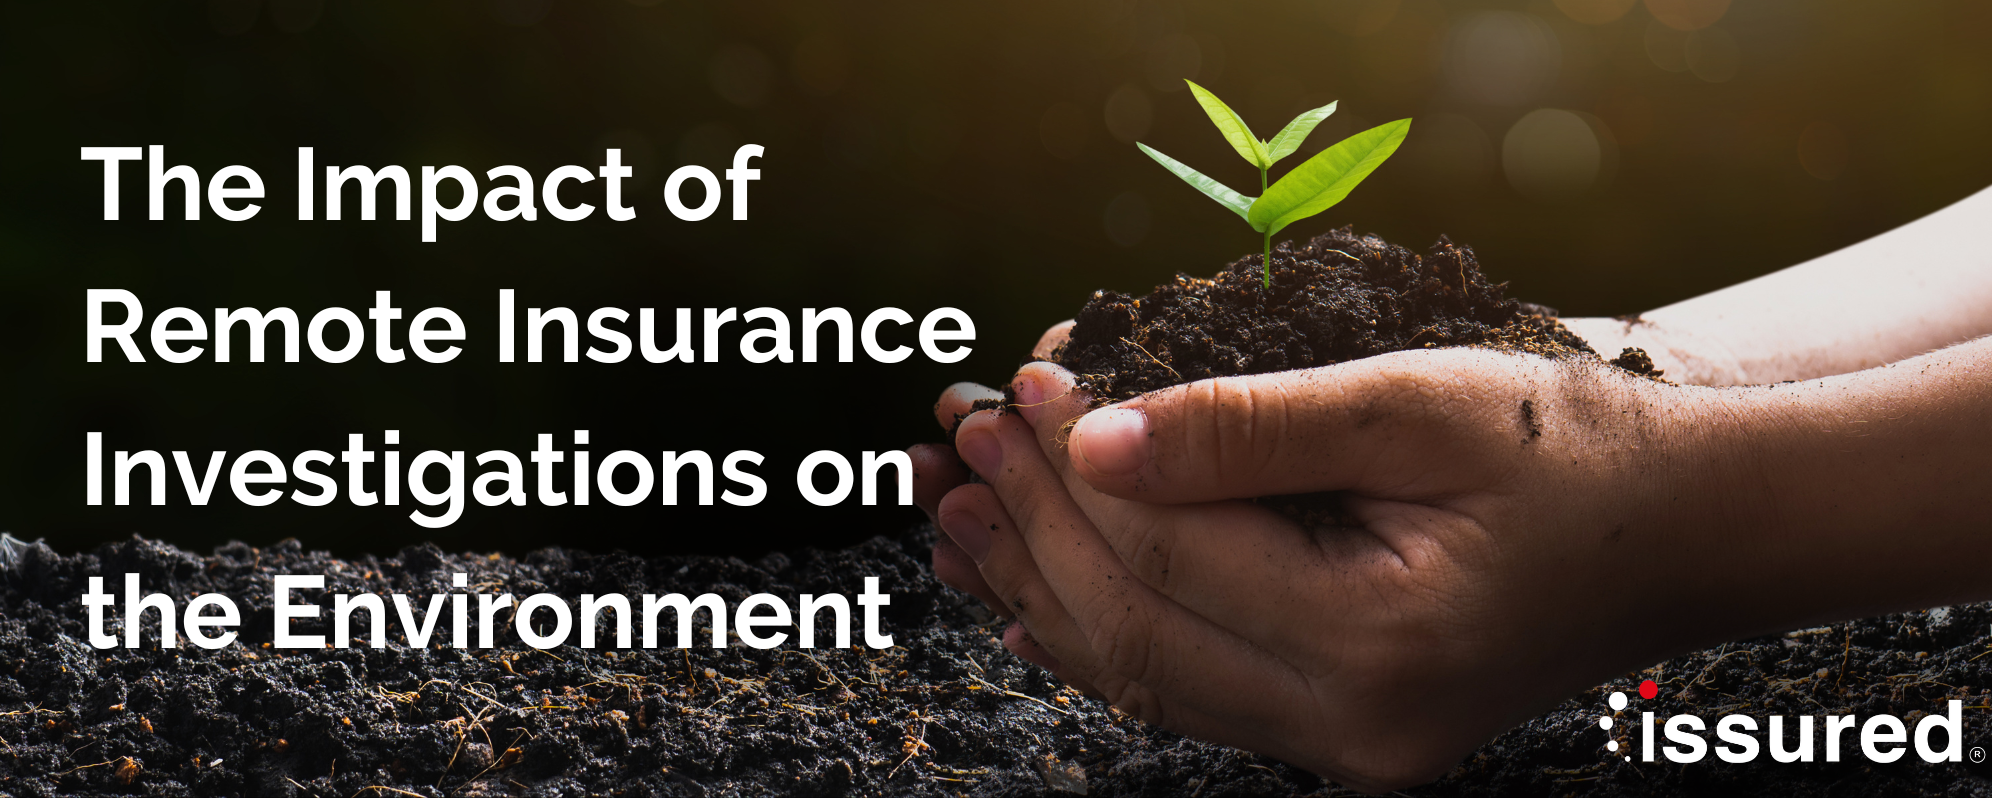 The Impact of Remote Insurance Investigations on the Environment